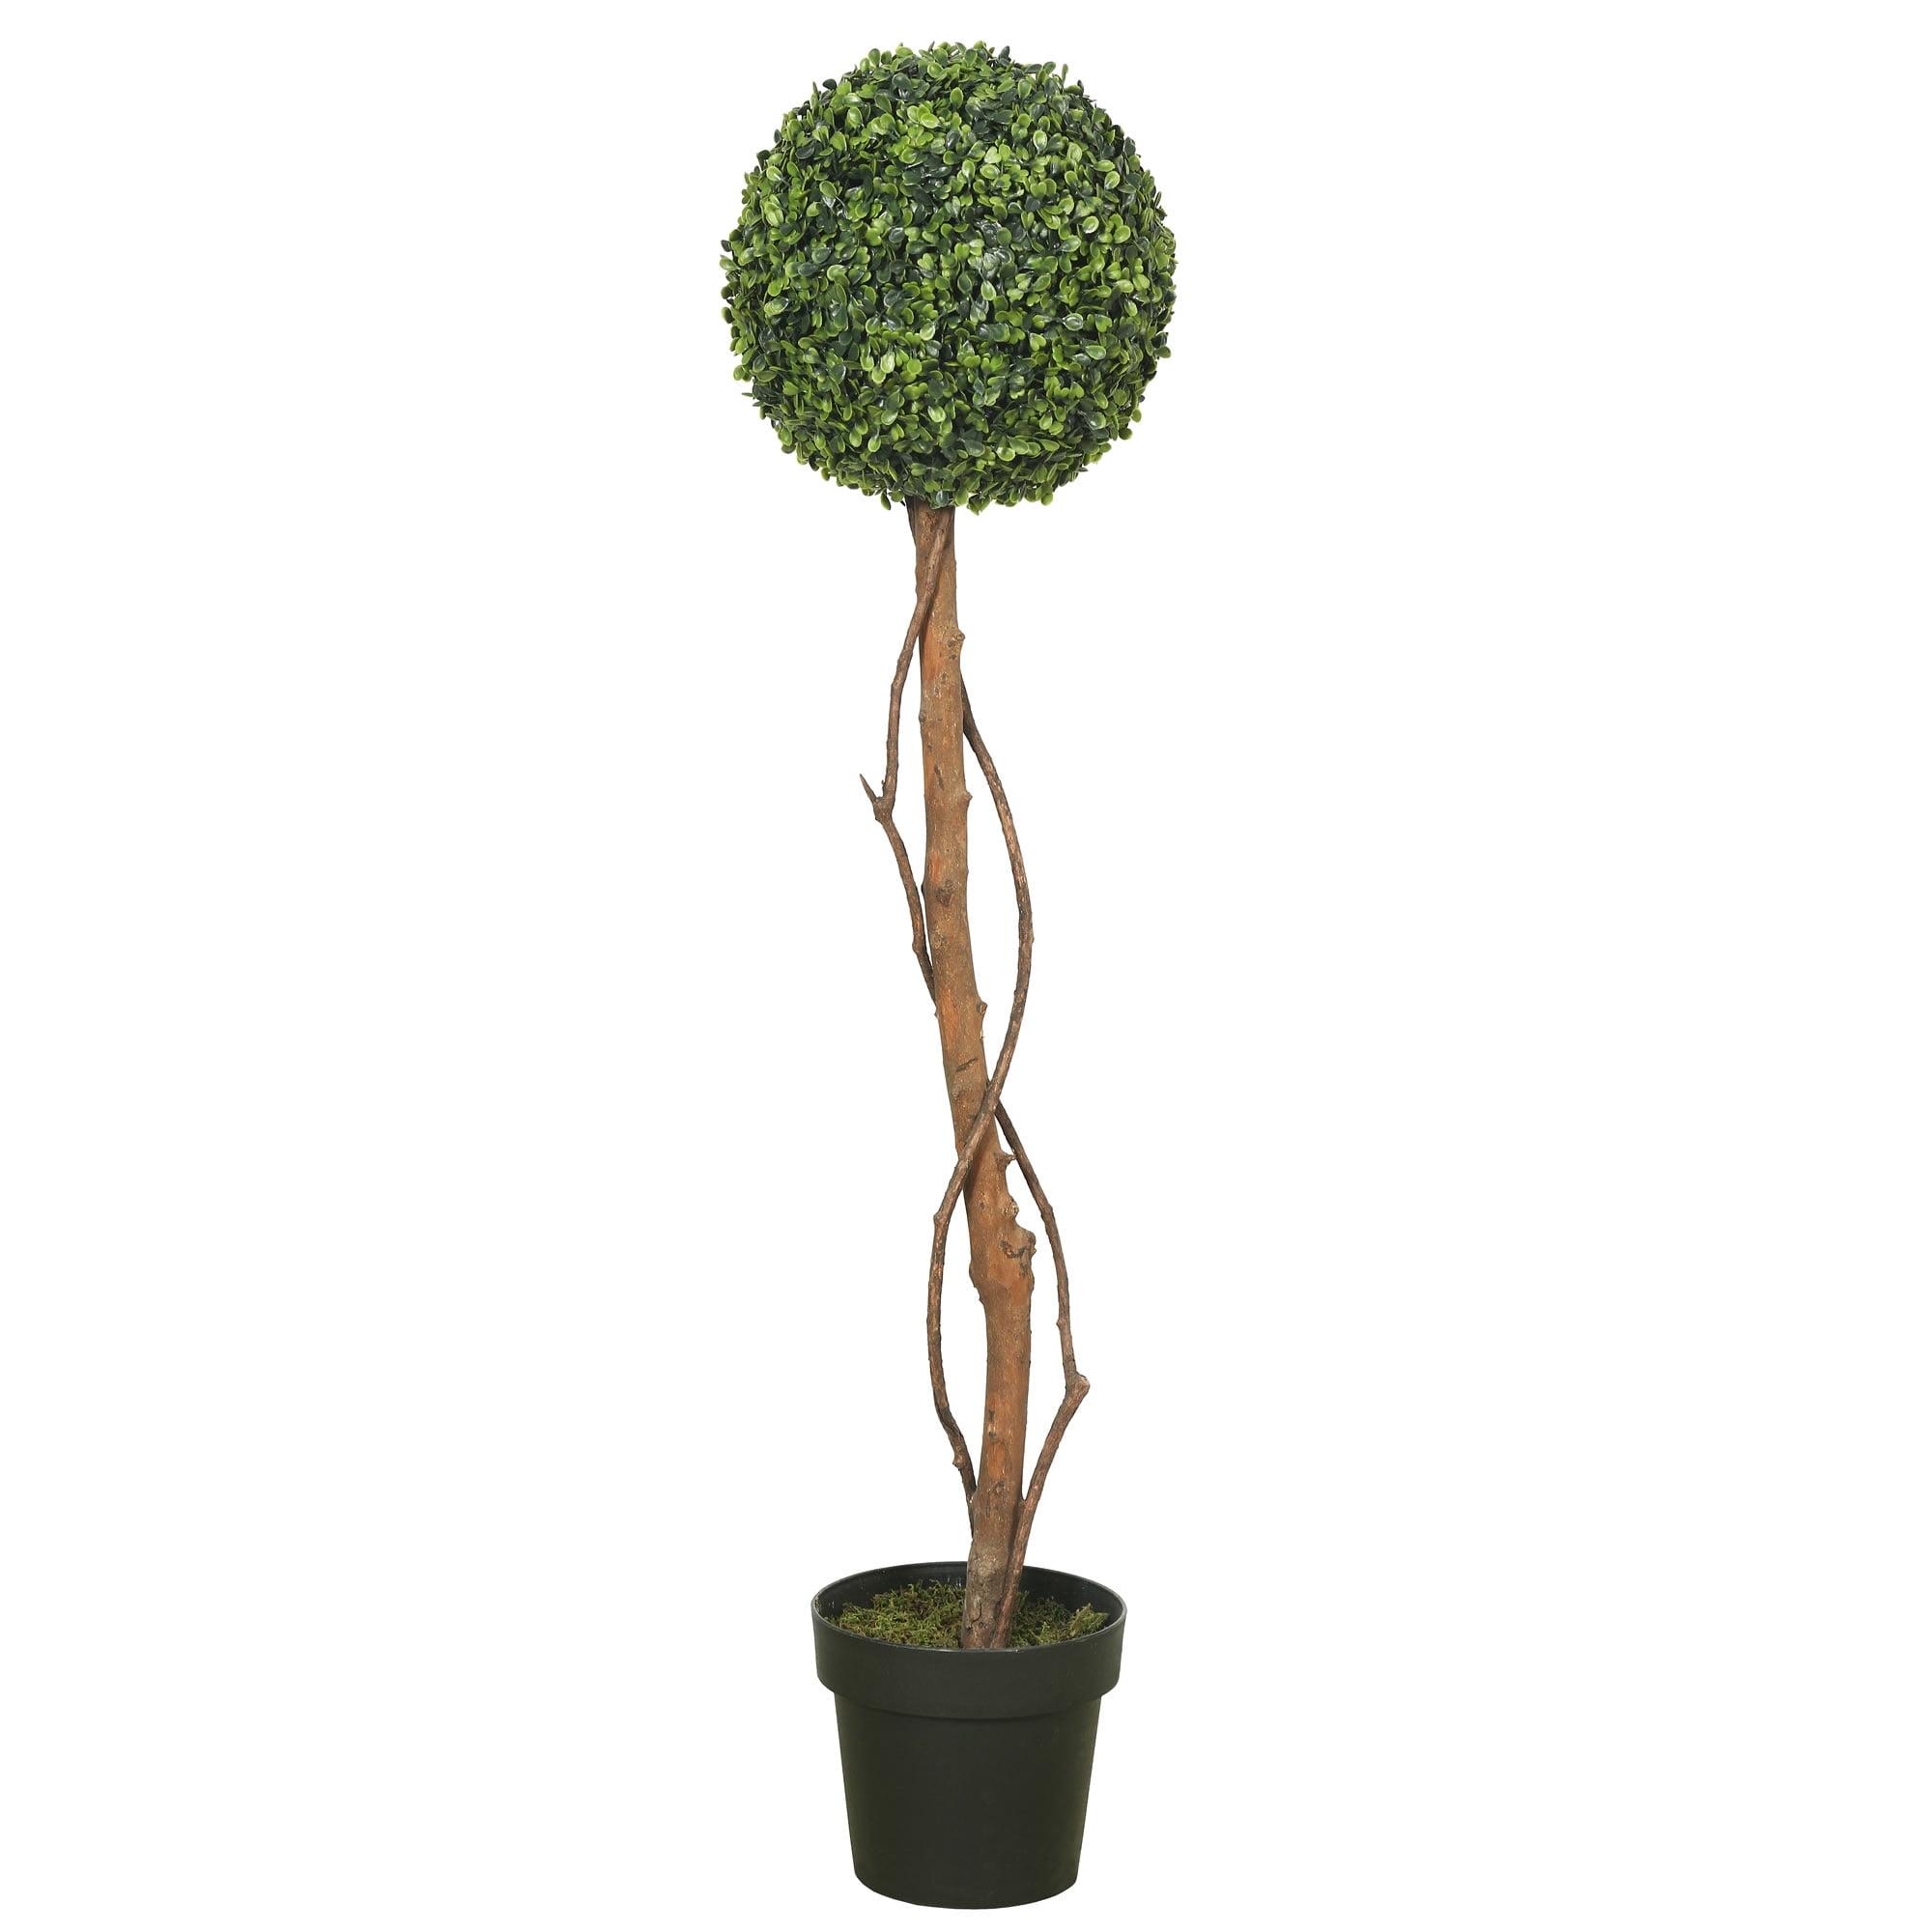 Luminous Plastic Boxwood Topiary Centerpiece with Lights - 39" Tall